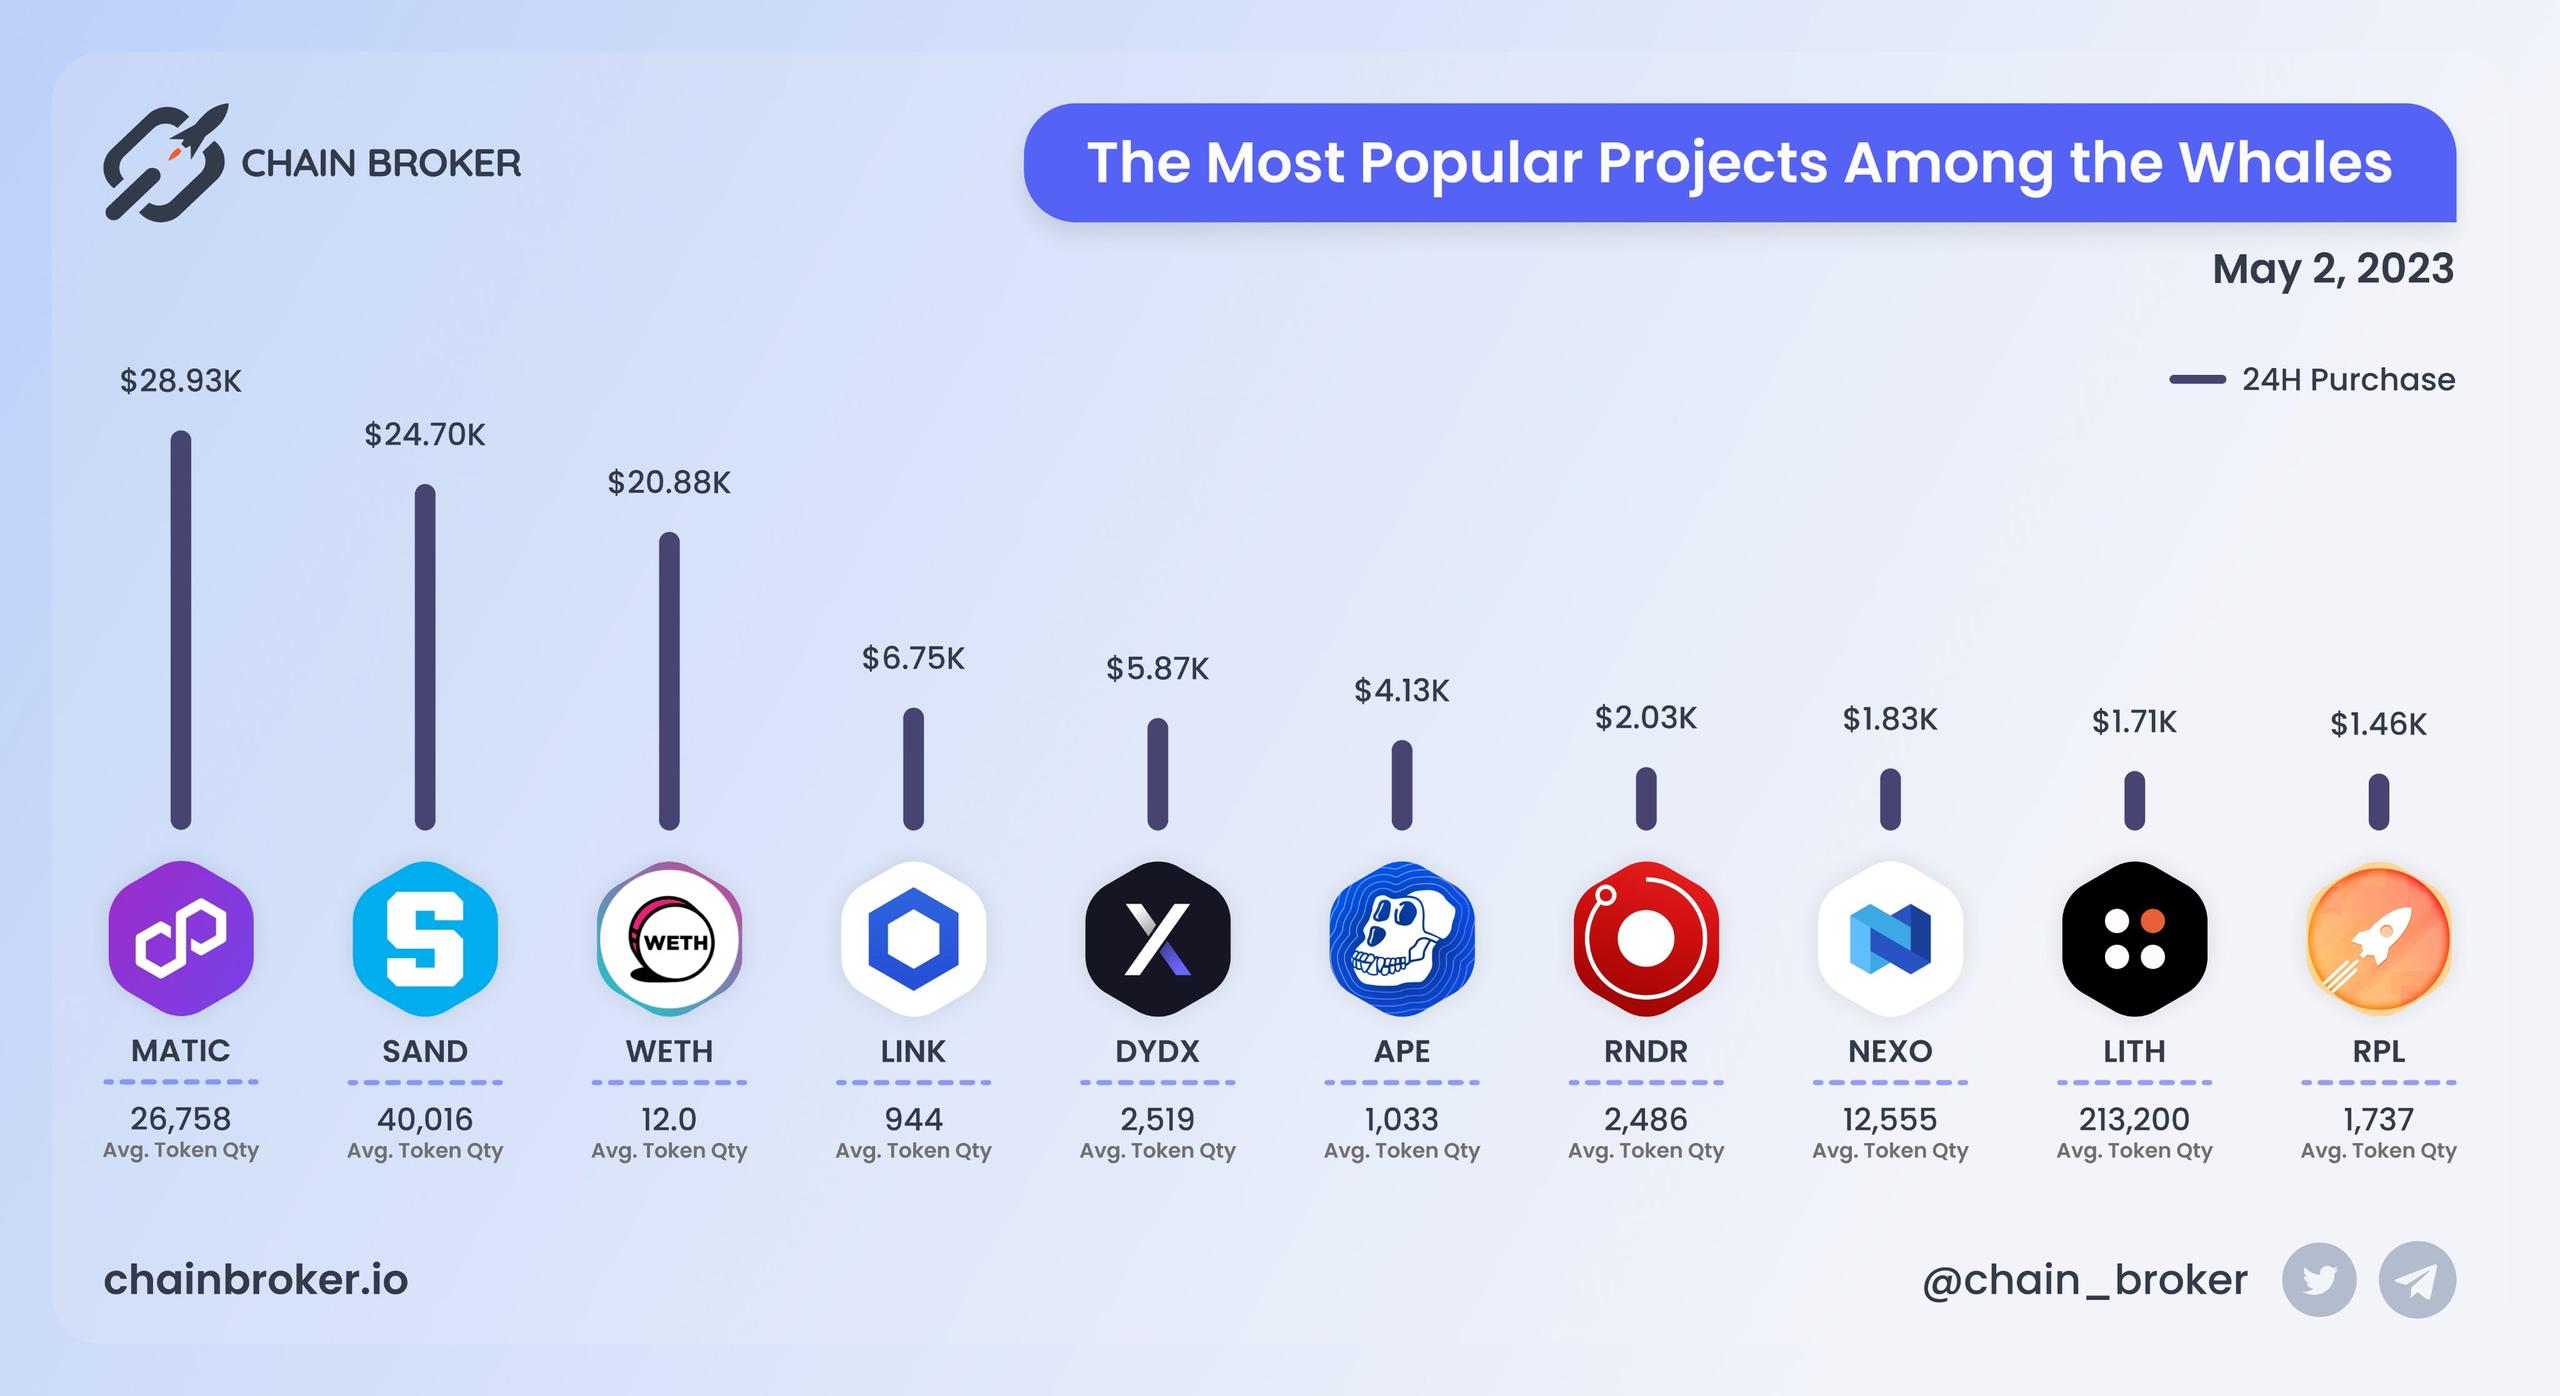 The most popular projects among whales